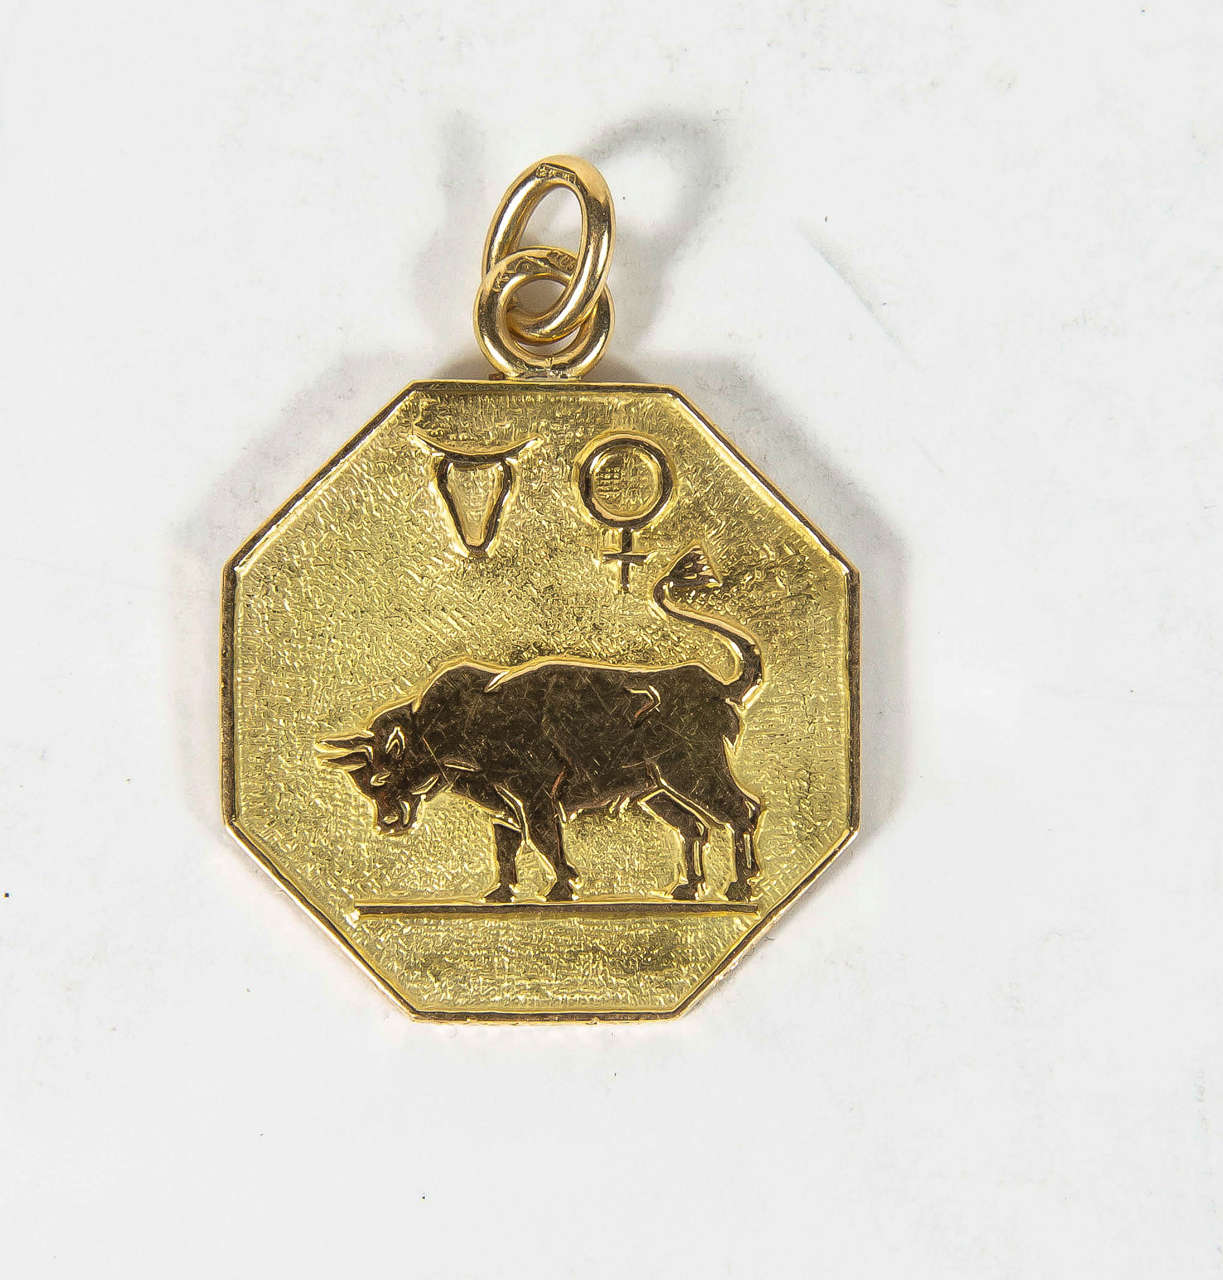 This pendant/charm is 18k yellow gold a depicts a relief bull with elements of the Taurus zodiac. It is signed Buccelatti as well.